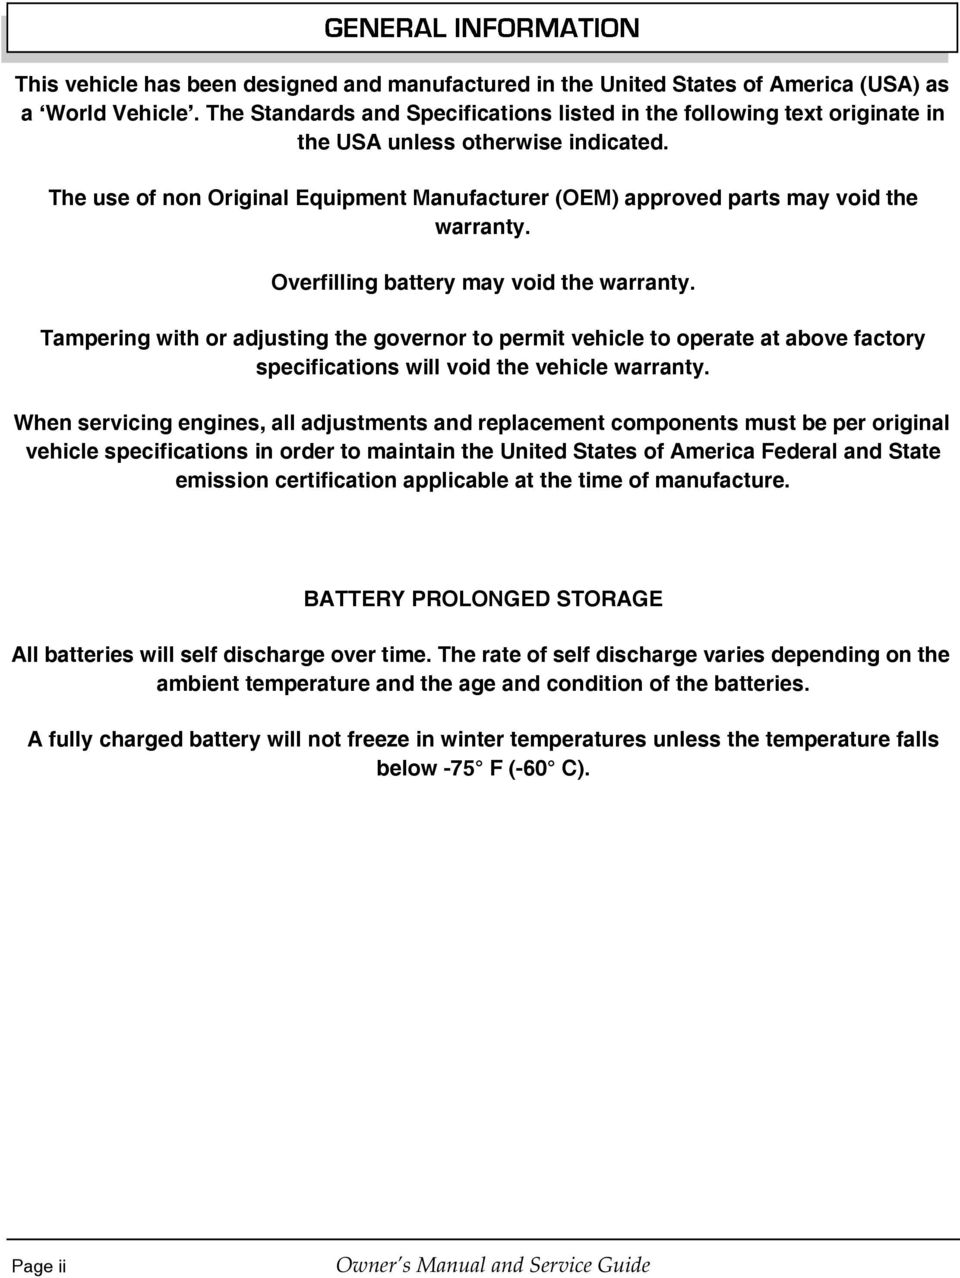 The use of non Original Equipment Manufacturer (OEM) approved parts may void the warranty. Overfilling battery may void the warranty.